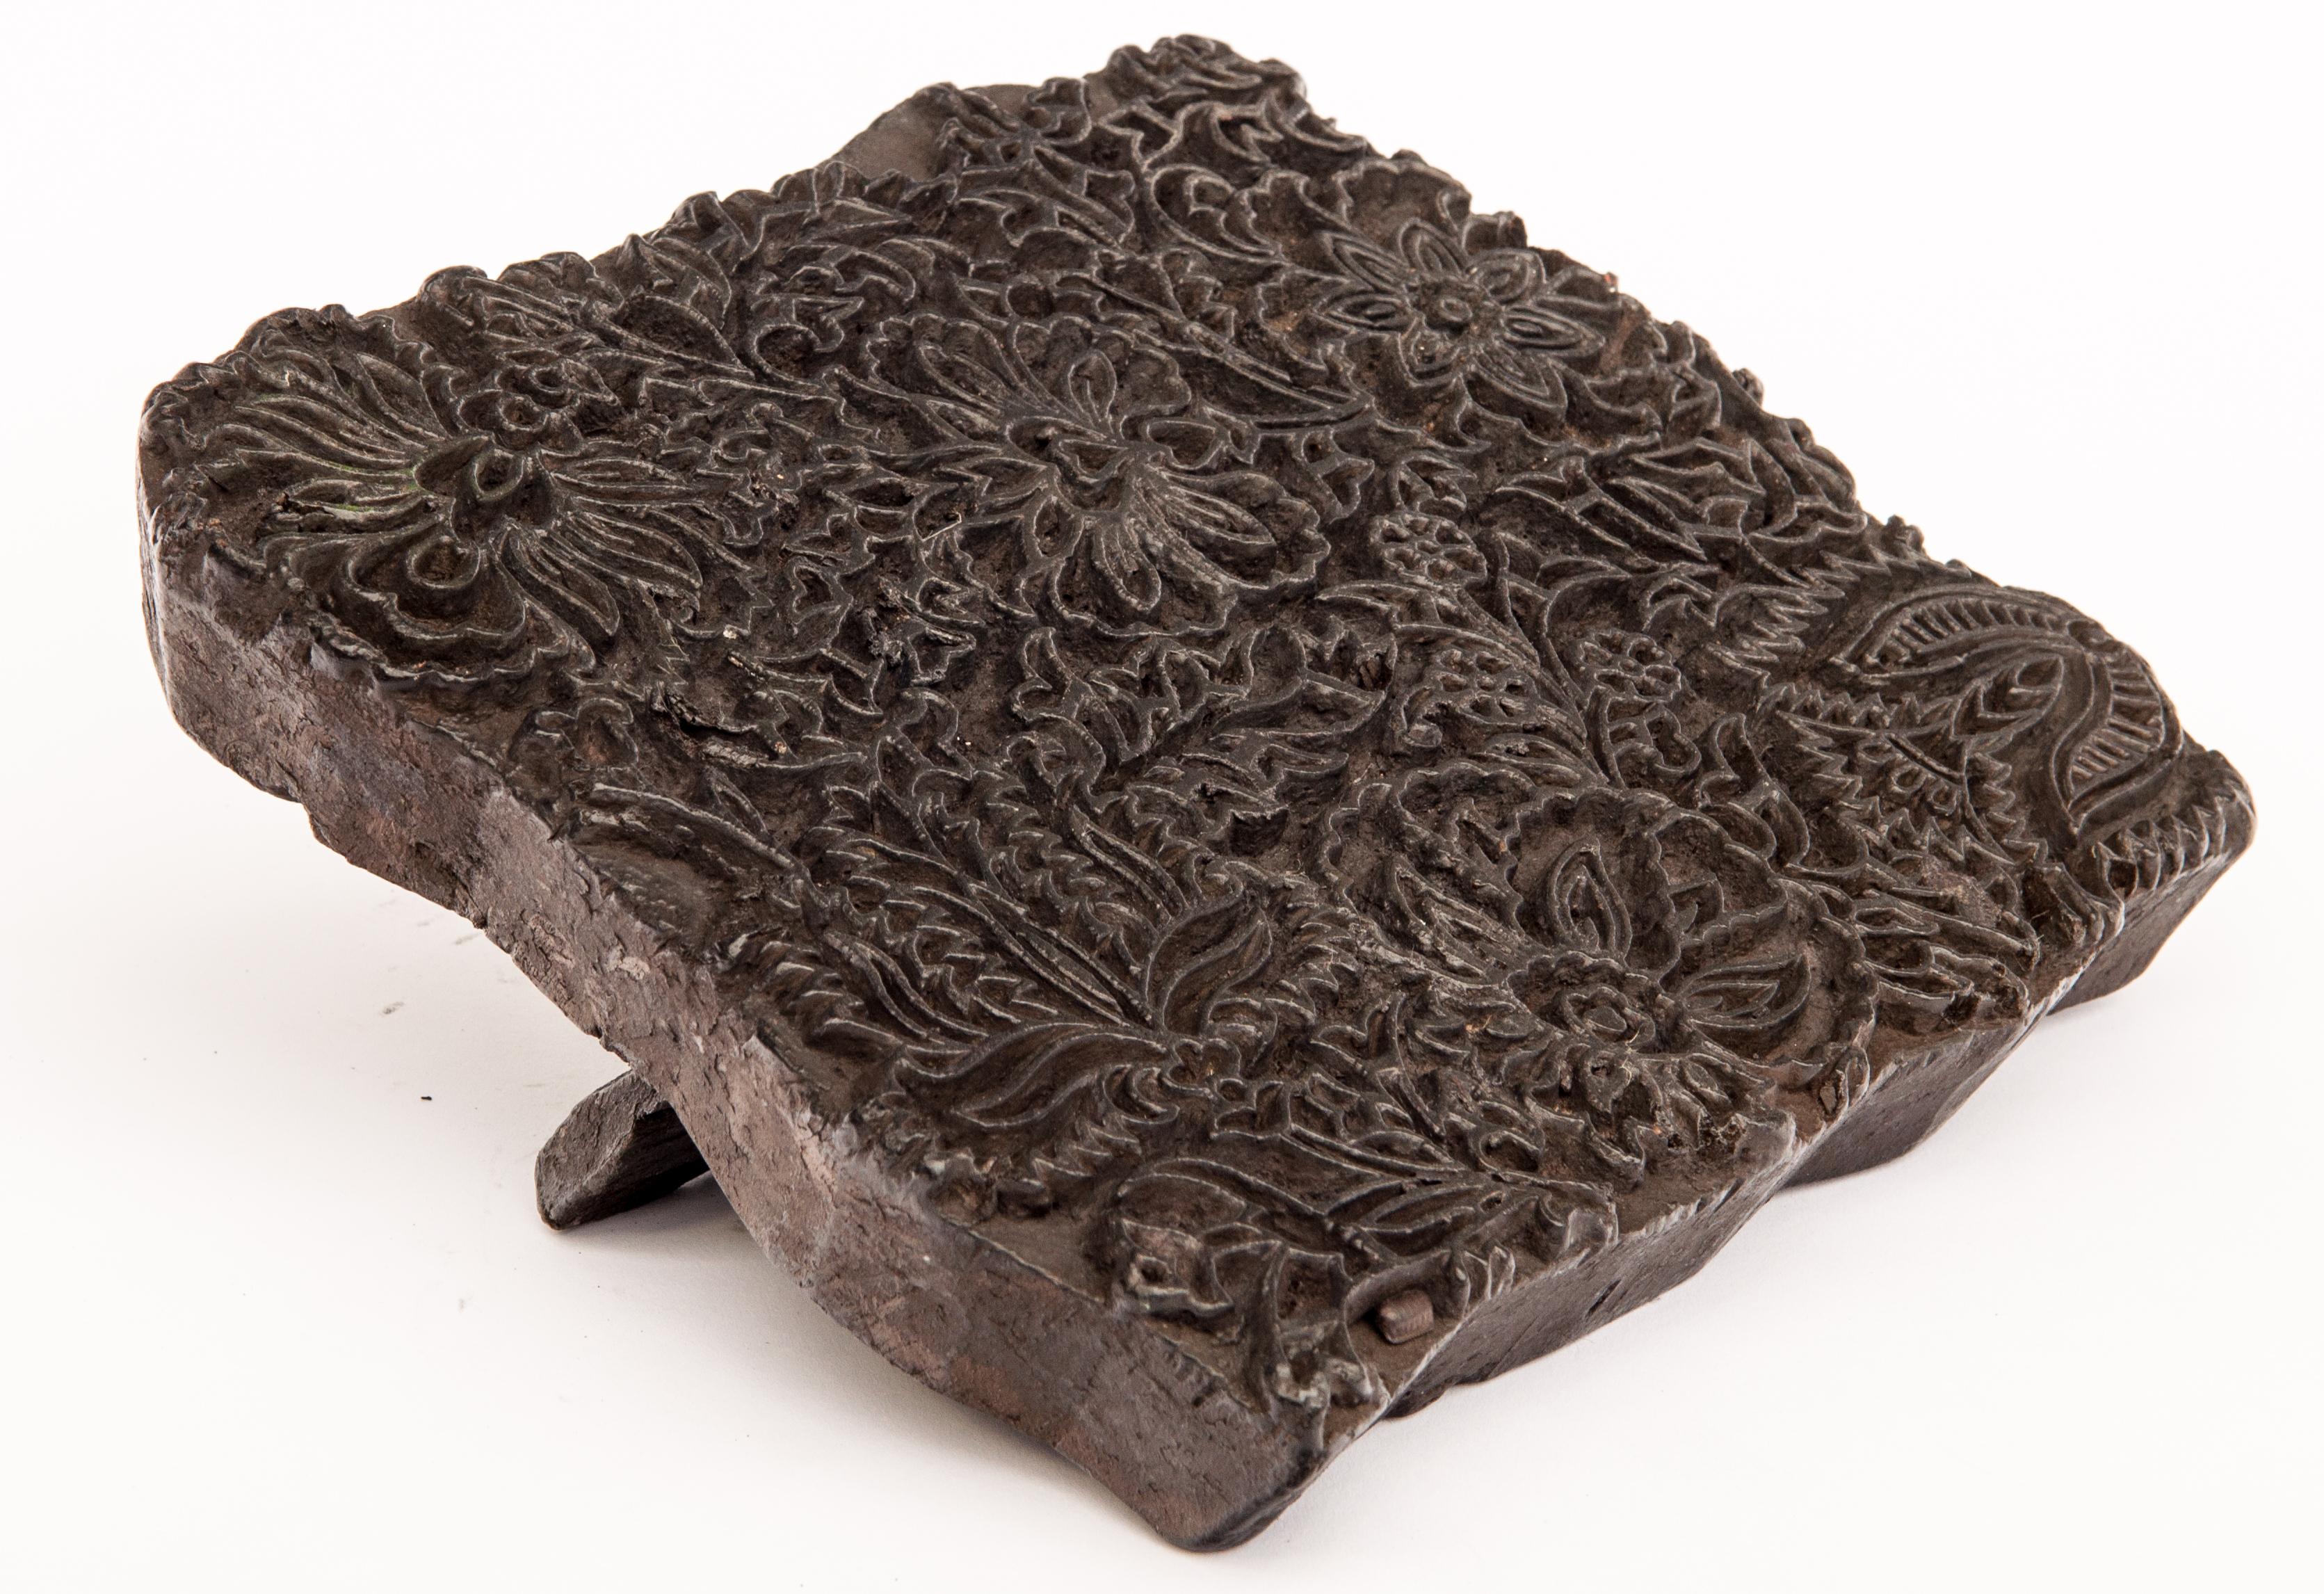 Hardwood Vintage Wooden Printing Block from India, Late 20th Century